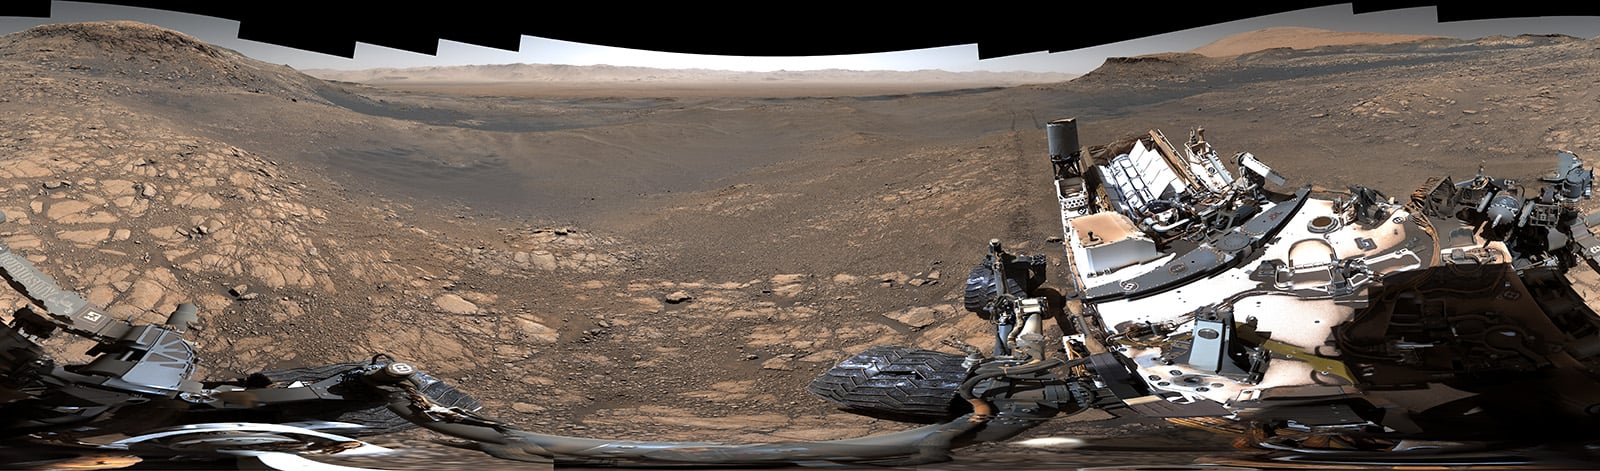 The Curiosity Mars Rover Just Captured Its Highest-Resolution Panorama Ever